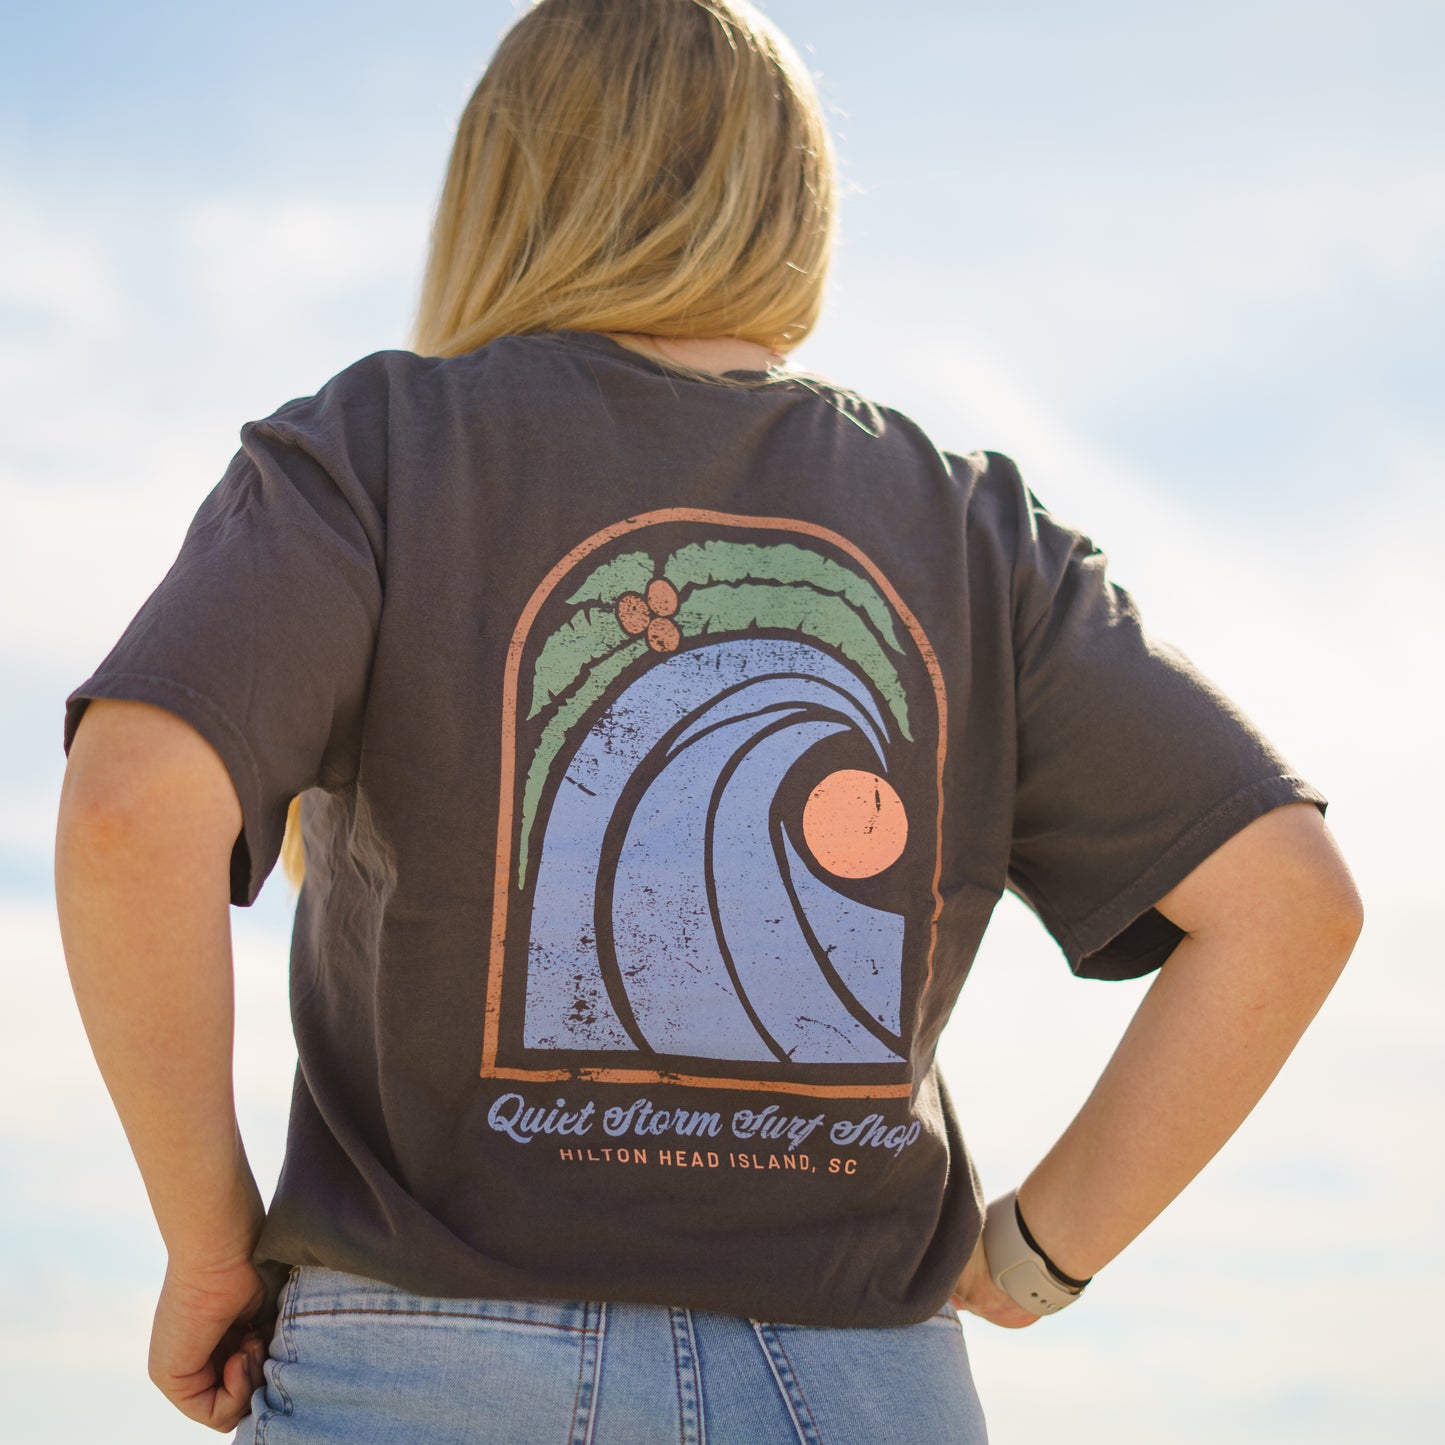 Women wearing grey T-shirt with design that has a palm tree with a wave and a moon with Quiet Storm Surf Shop Hilton Head Island, SC